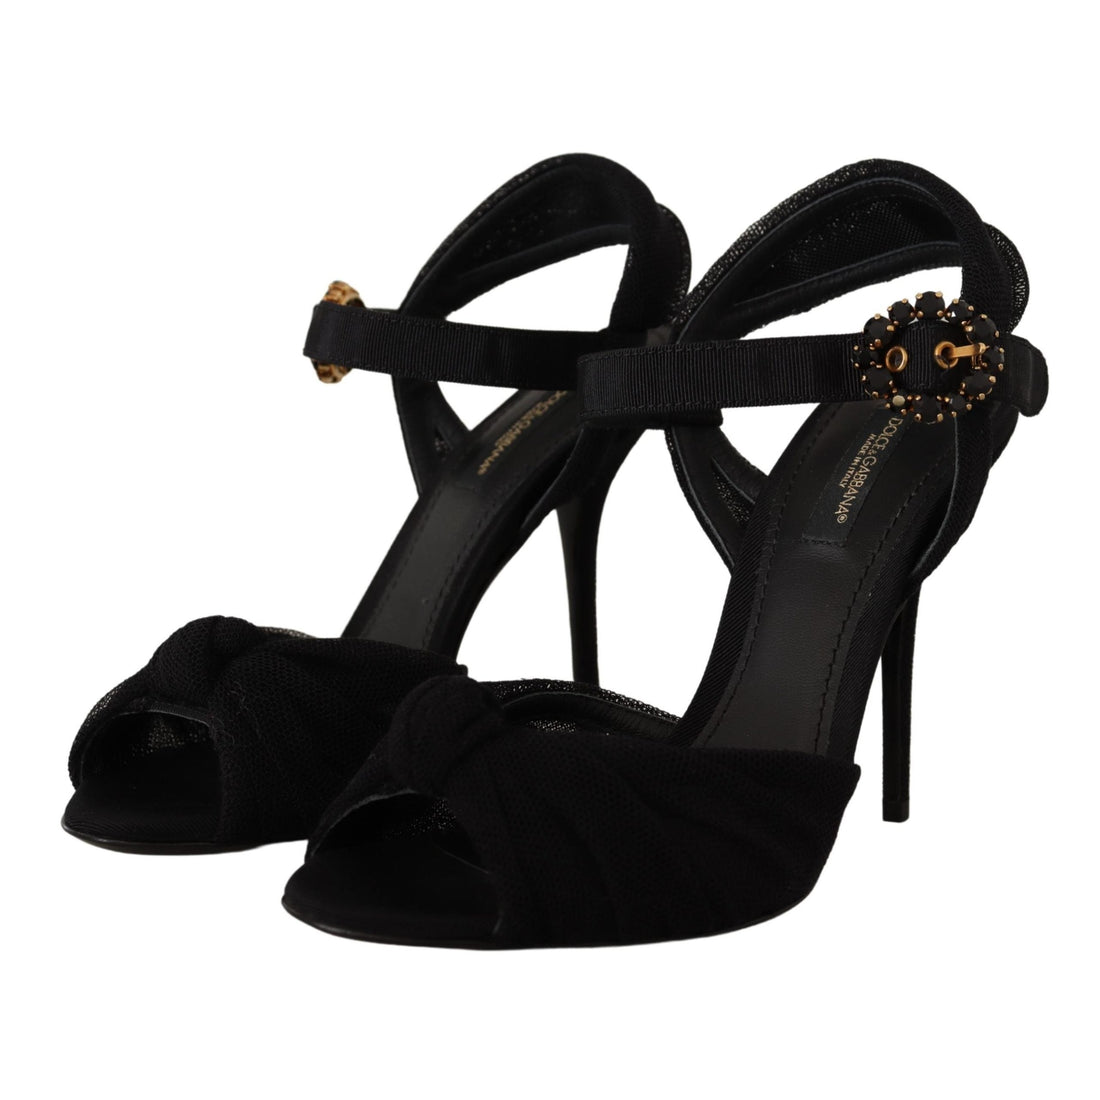 Dolce & Gabbana Black Tulle Ankle Strap Heels with Crystal Buckle